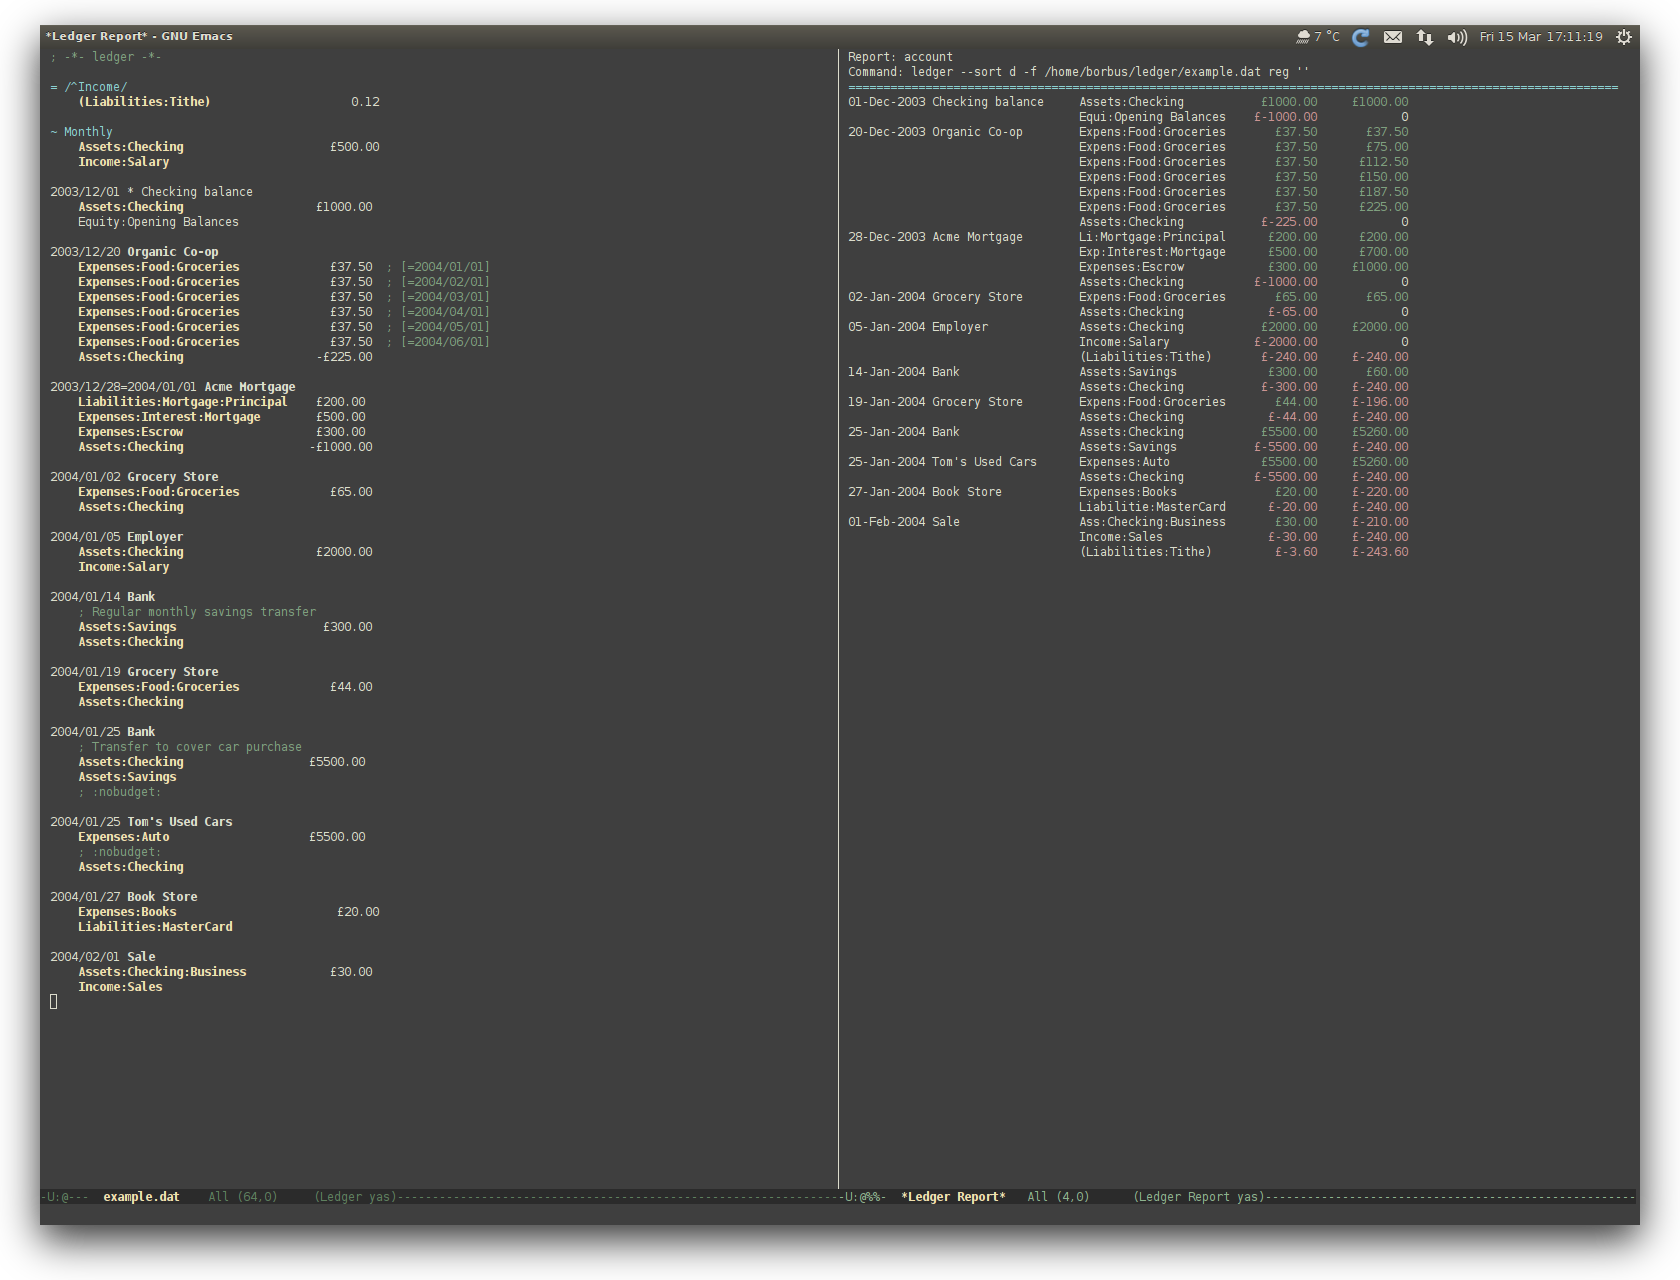 /TakeV/spacemacs/media/commit/4af3eabc45c02c31b04d7a1fa0a35c51f933a6a7/layers/finance/img/ledger.png